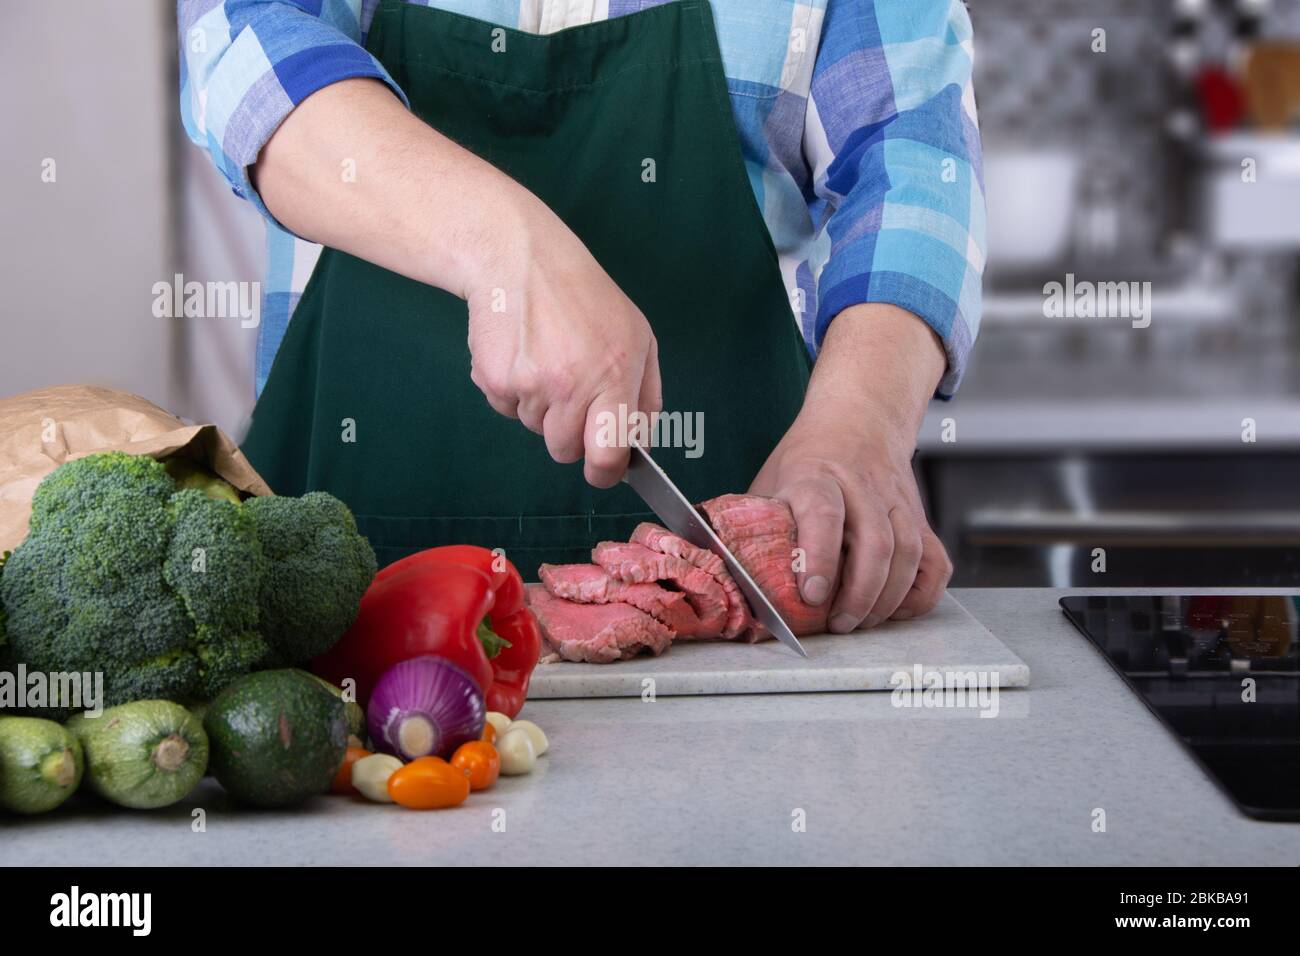 Homemade Food For Healthy Eaters... Stock Photo